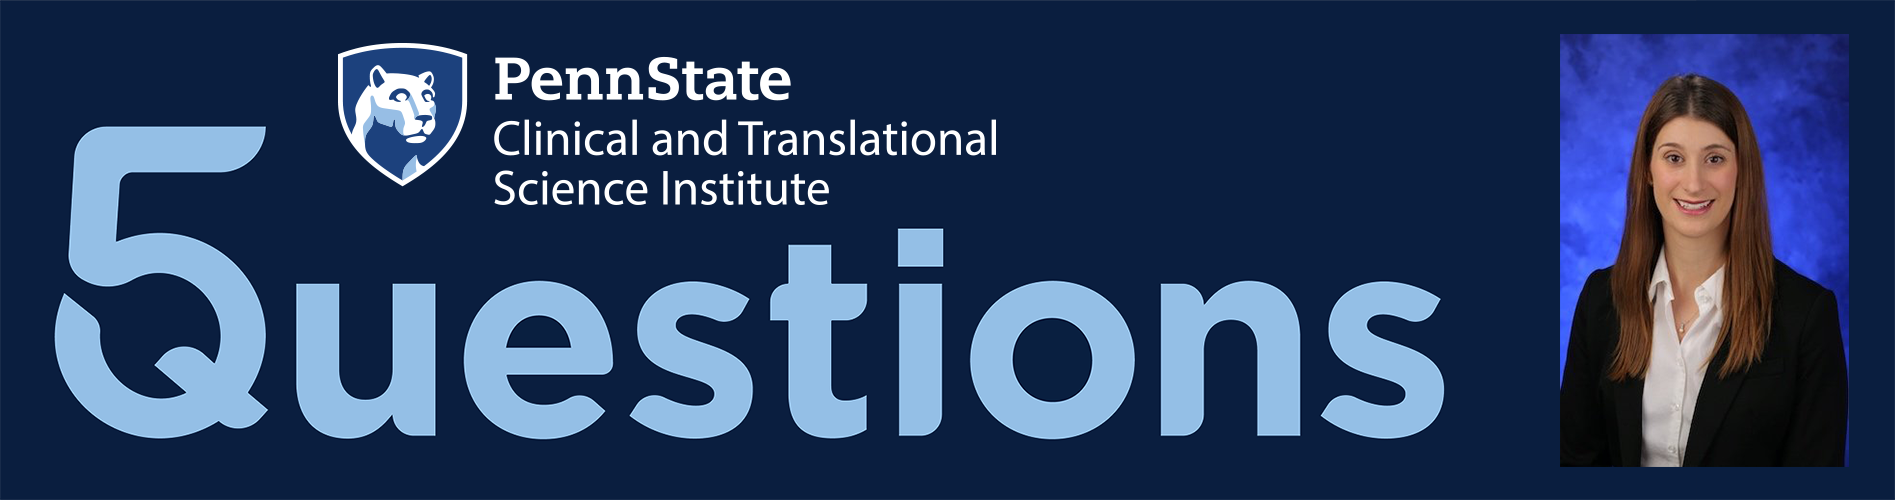 The logo for Penn State Clinical and Translational Science Institute 5 Questions series is used with a photo of Dr. Kathleen Sturgeon.